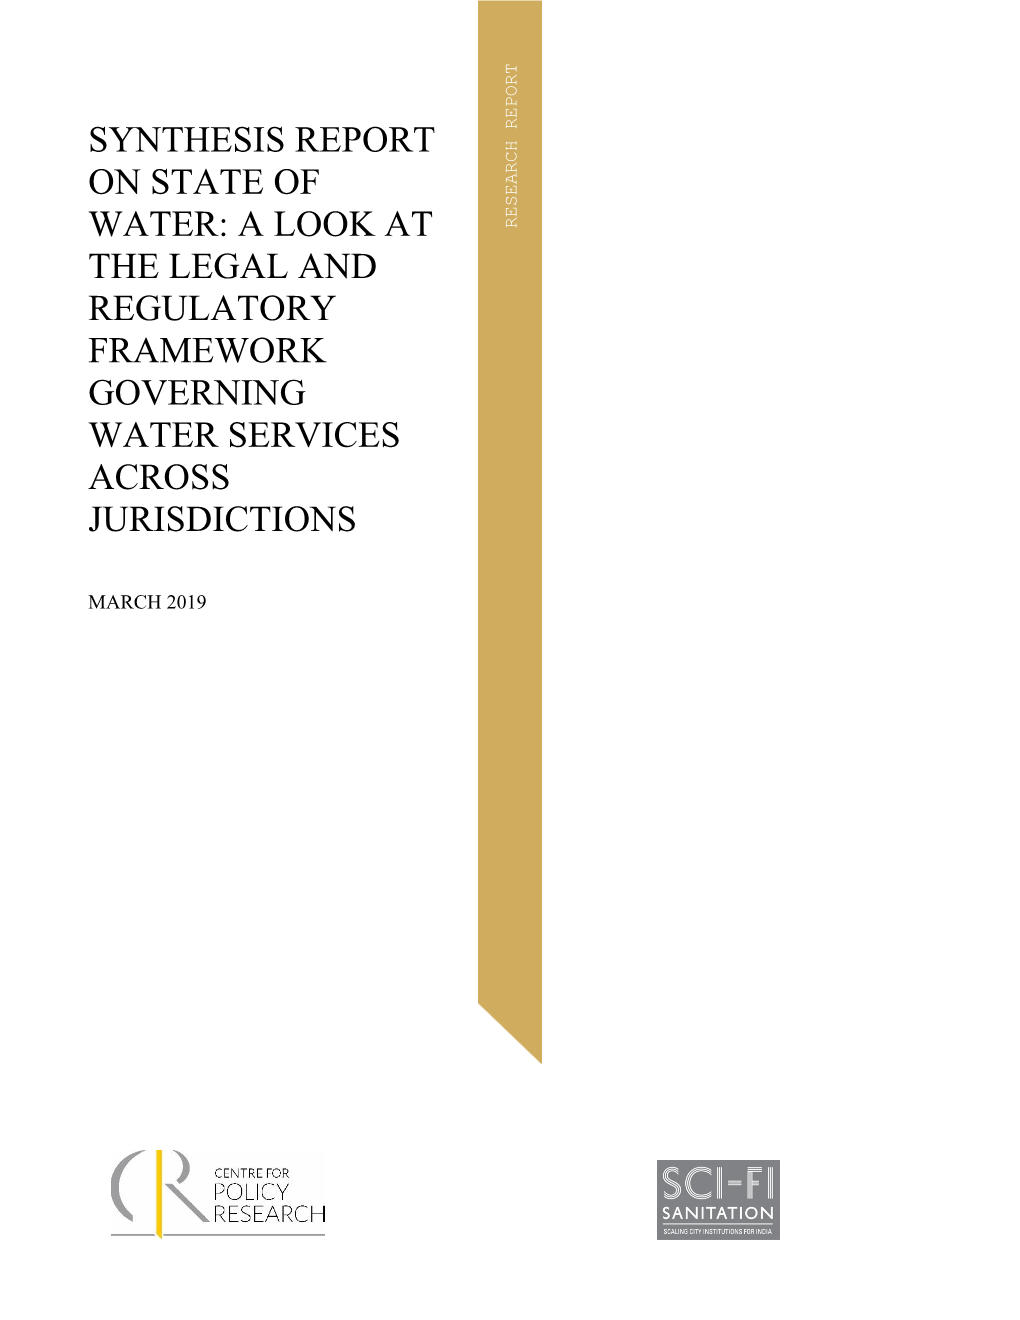 Synthesis Report on State of Water: a Look at the Legal and Regulatory Framework